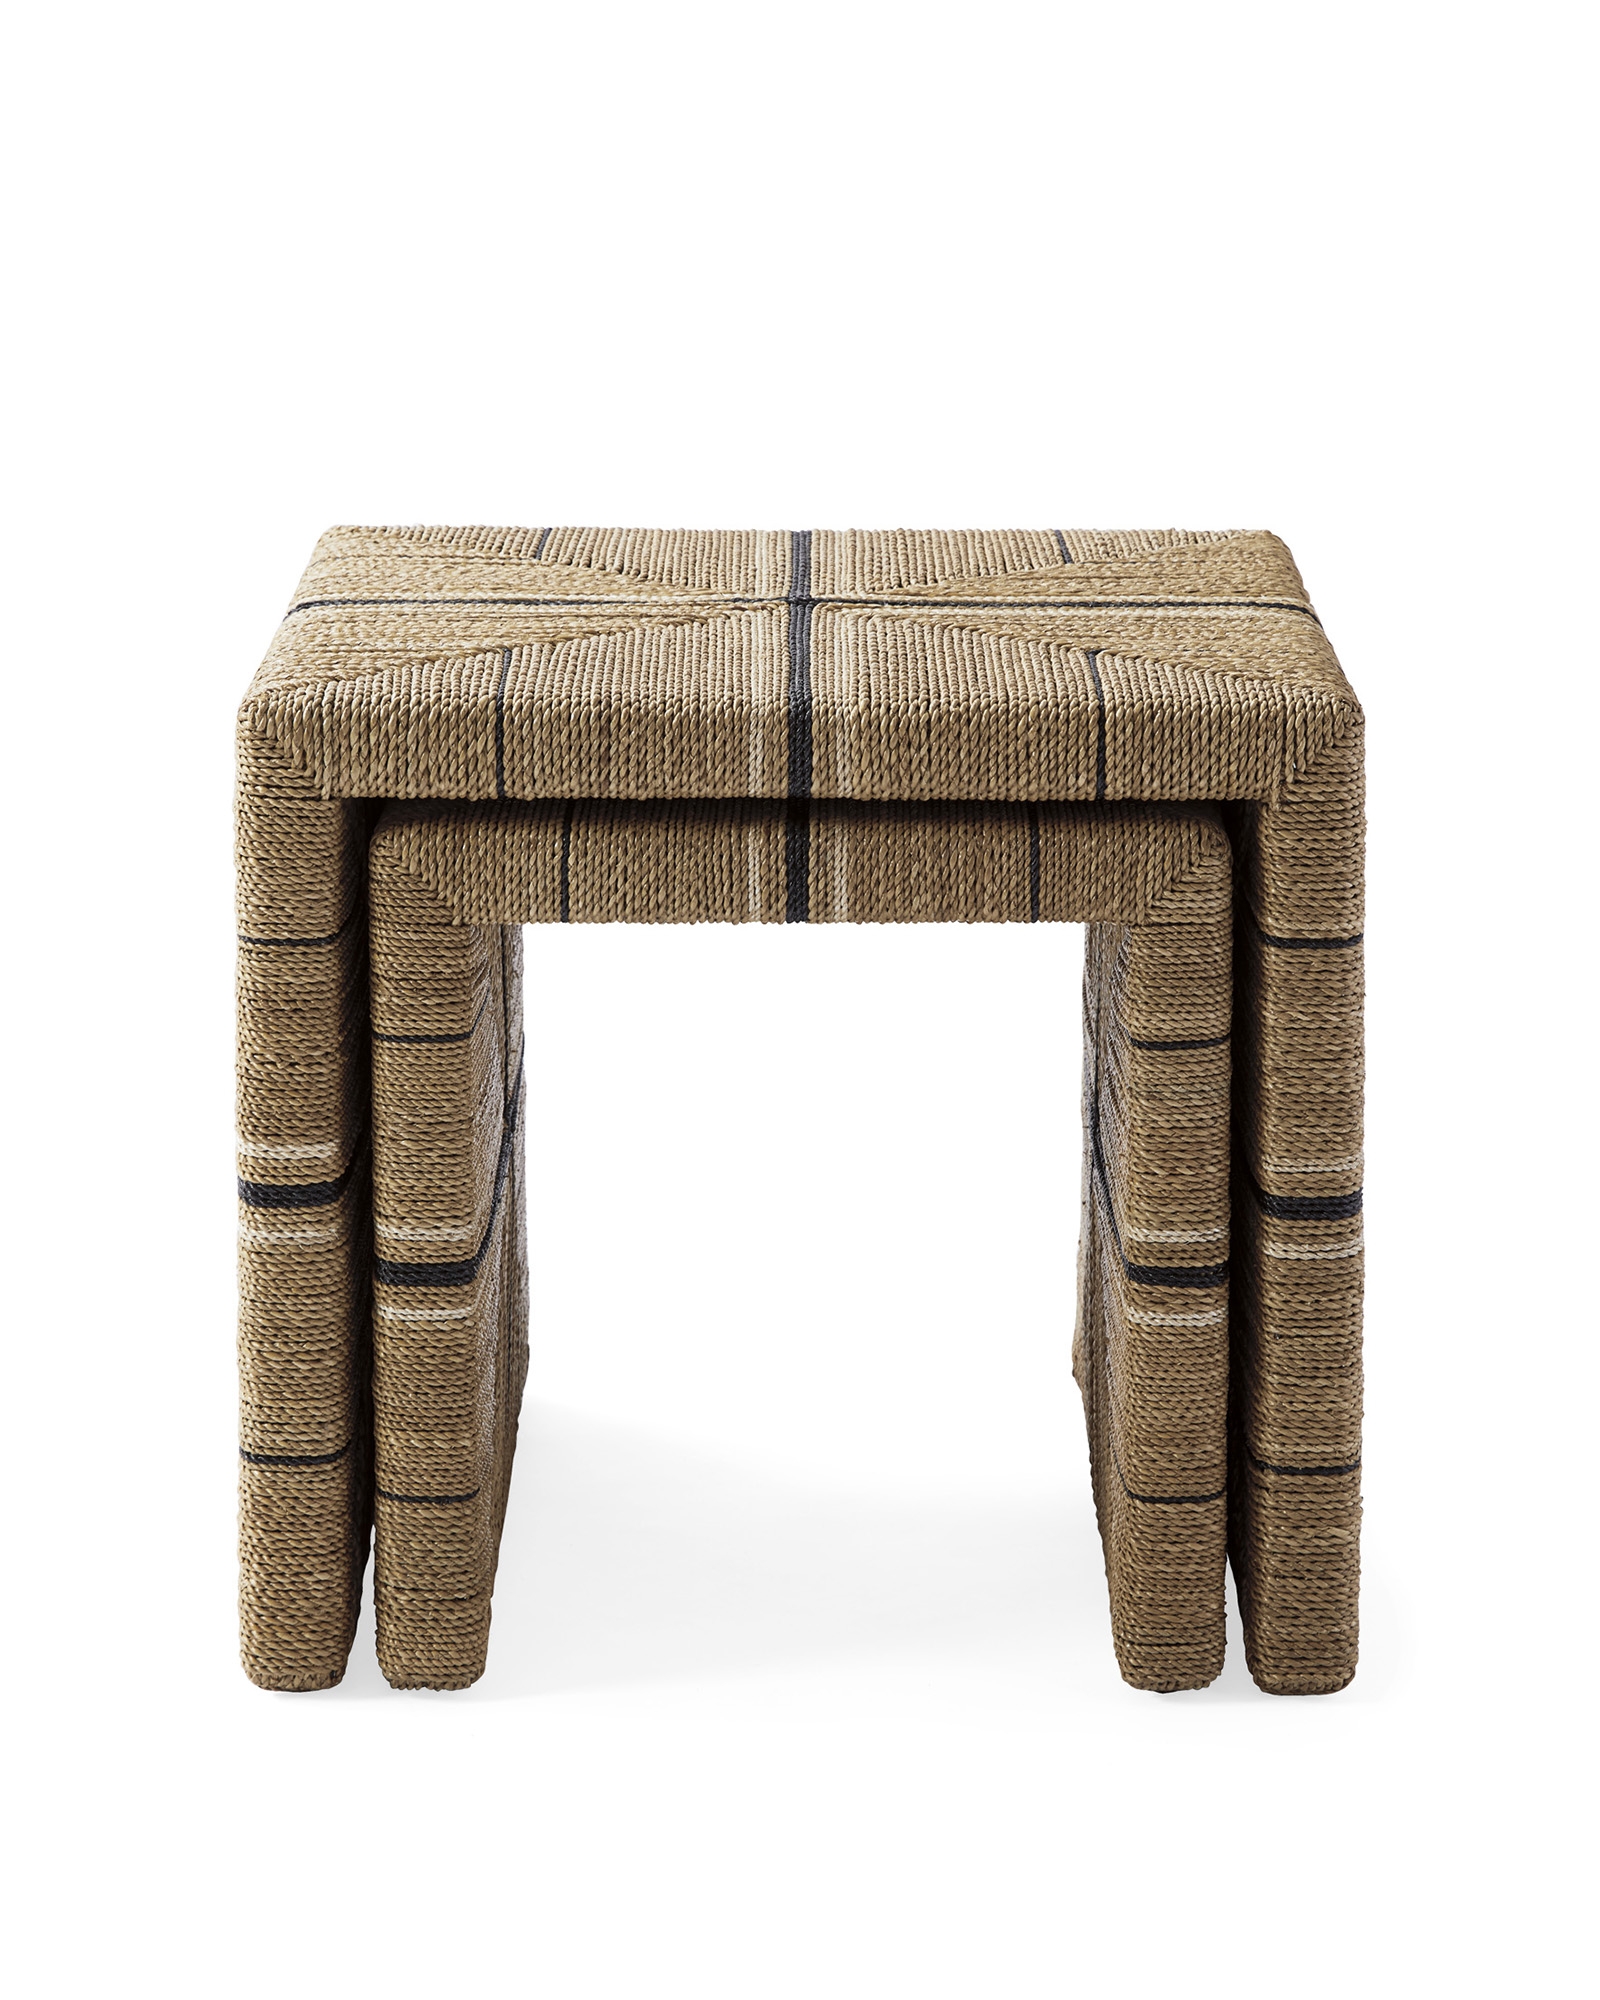 Carson Nesting Tables - Image 0